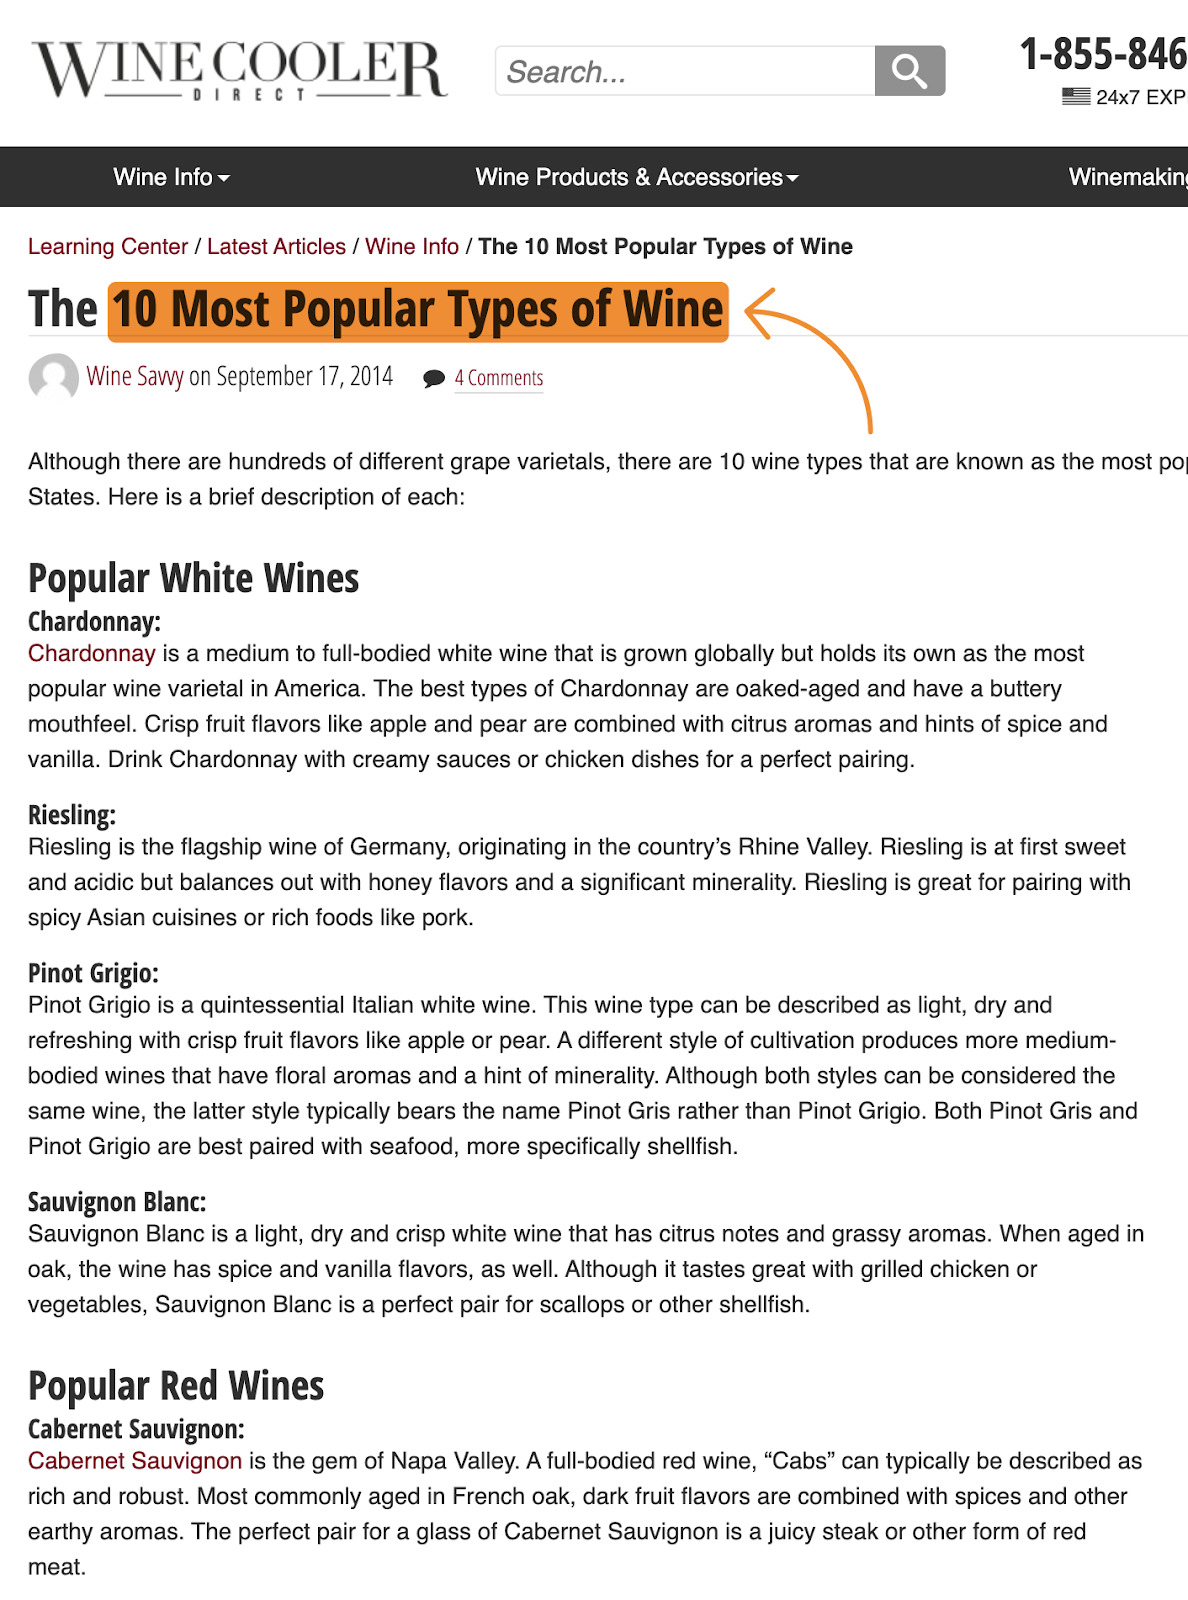 List of 10 popular types of wine by Winecooler Direct